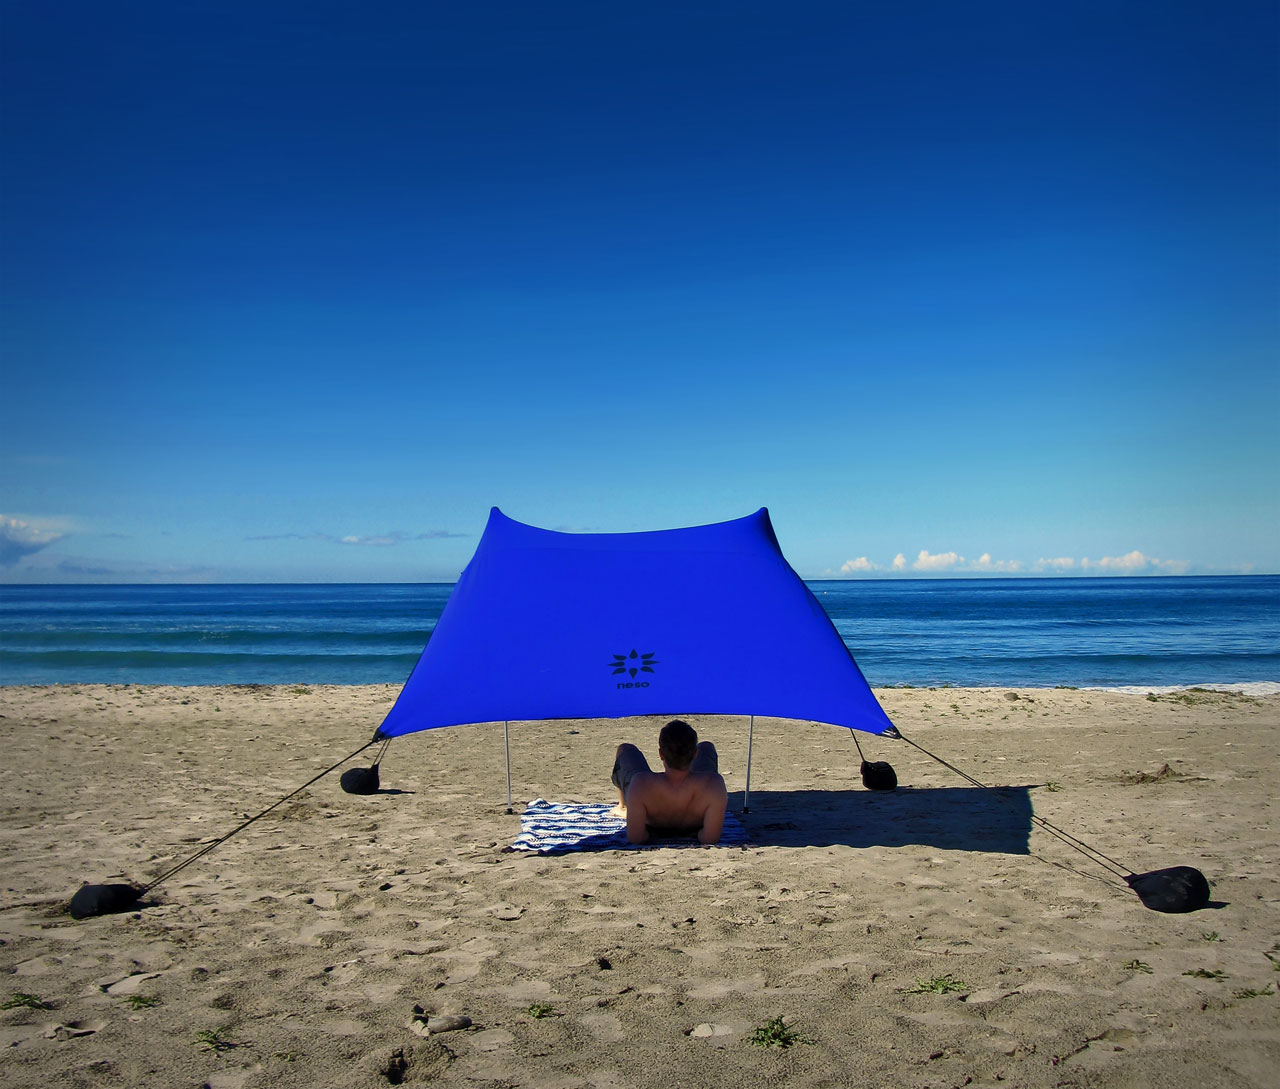 Lightweight, Portable Sunshades that Offer UPF 50+ Protection